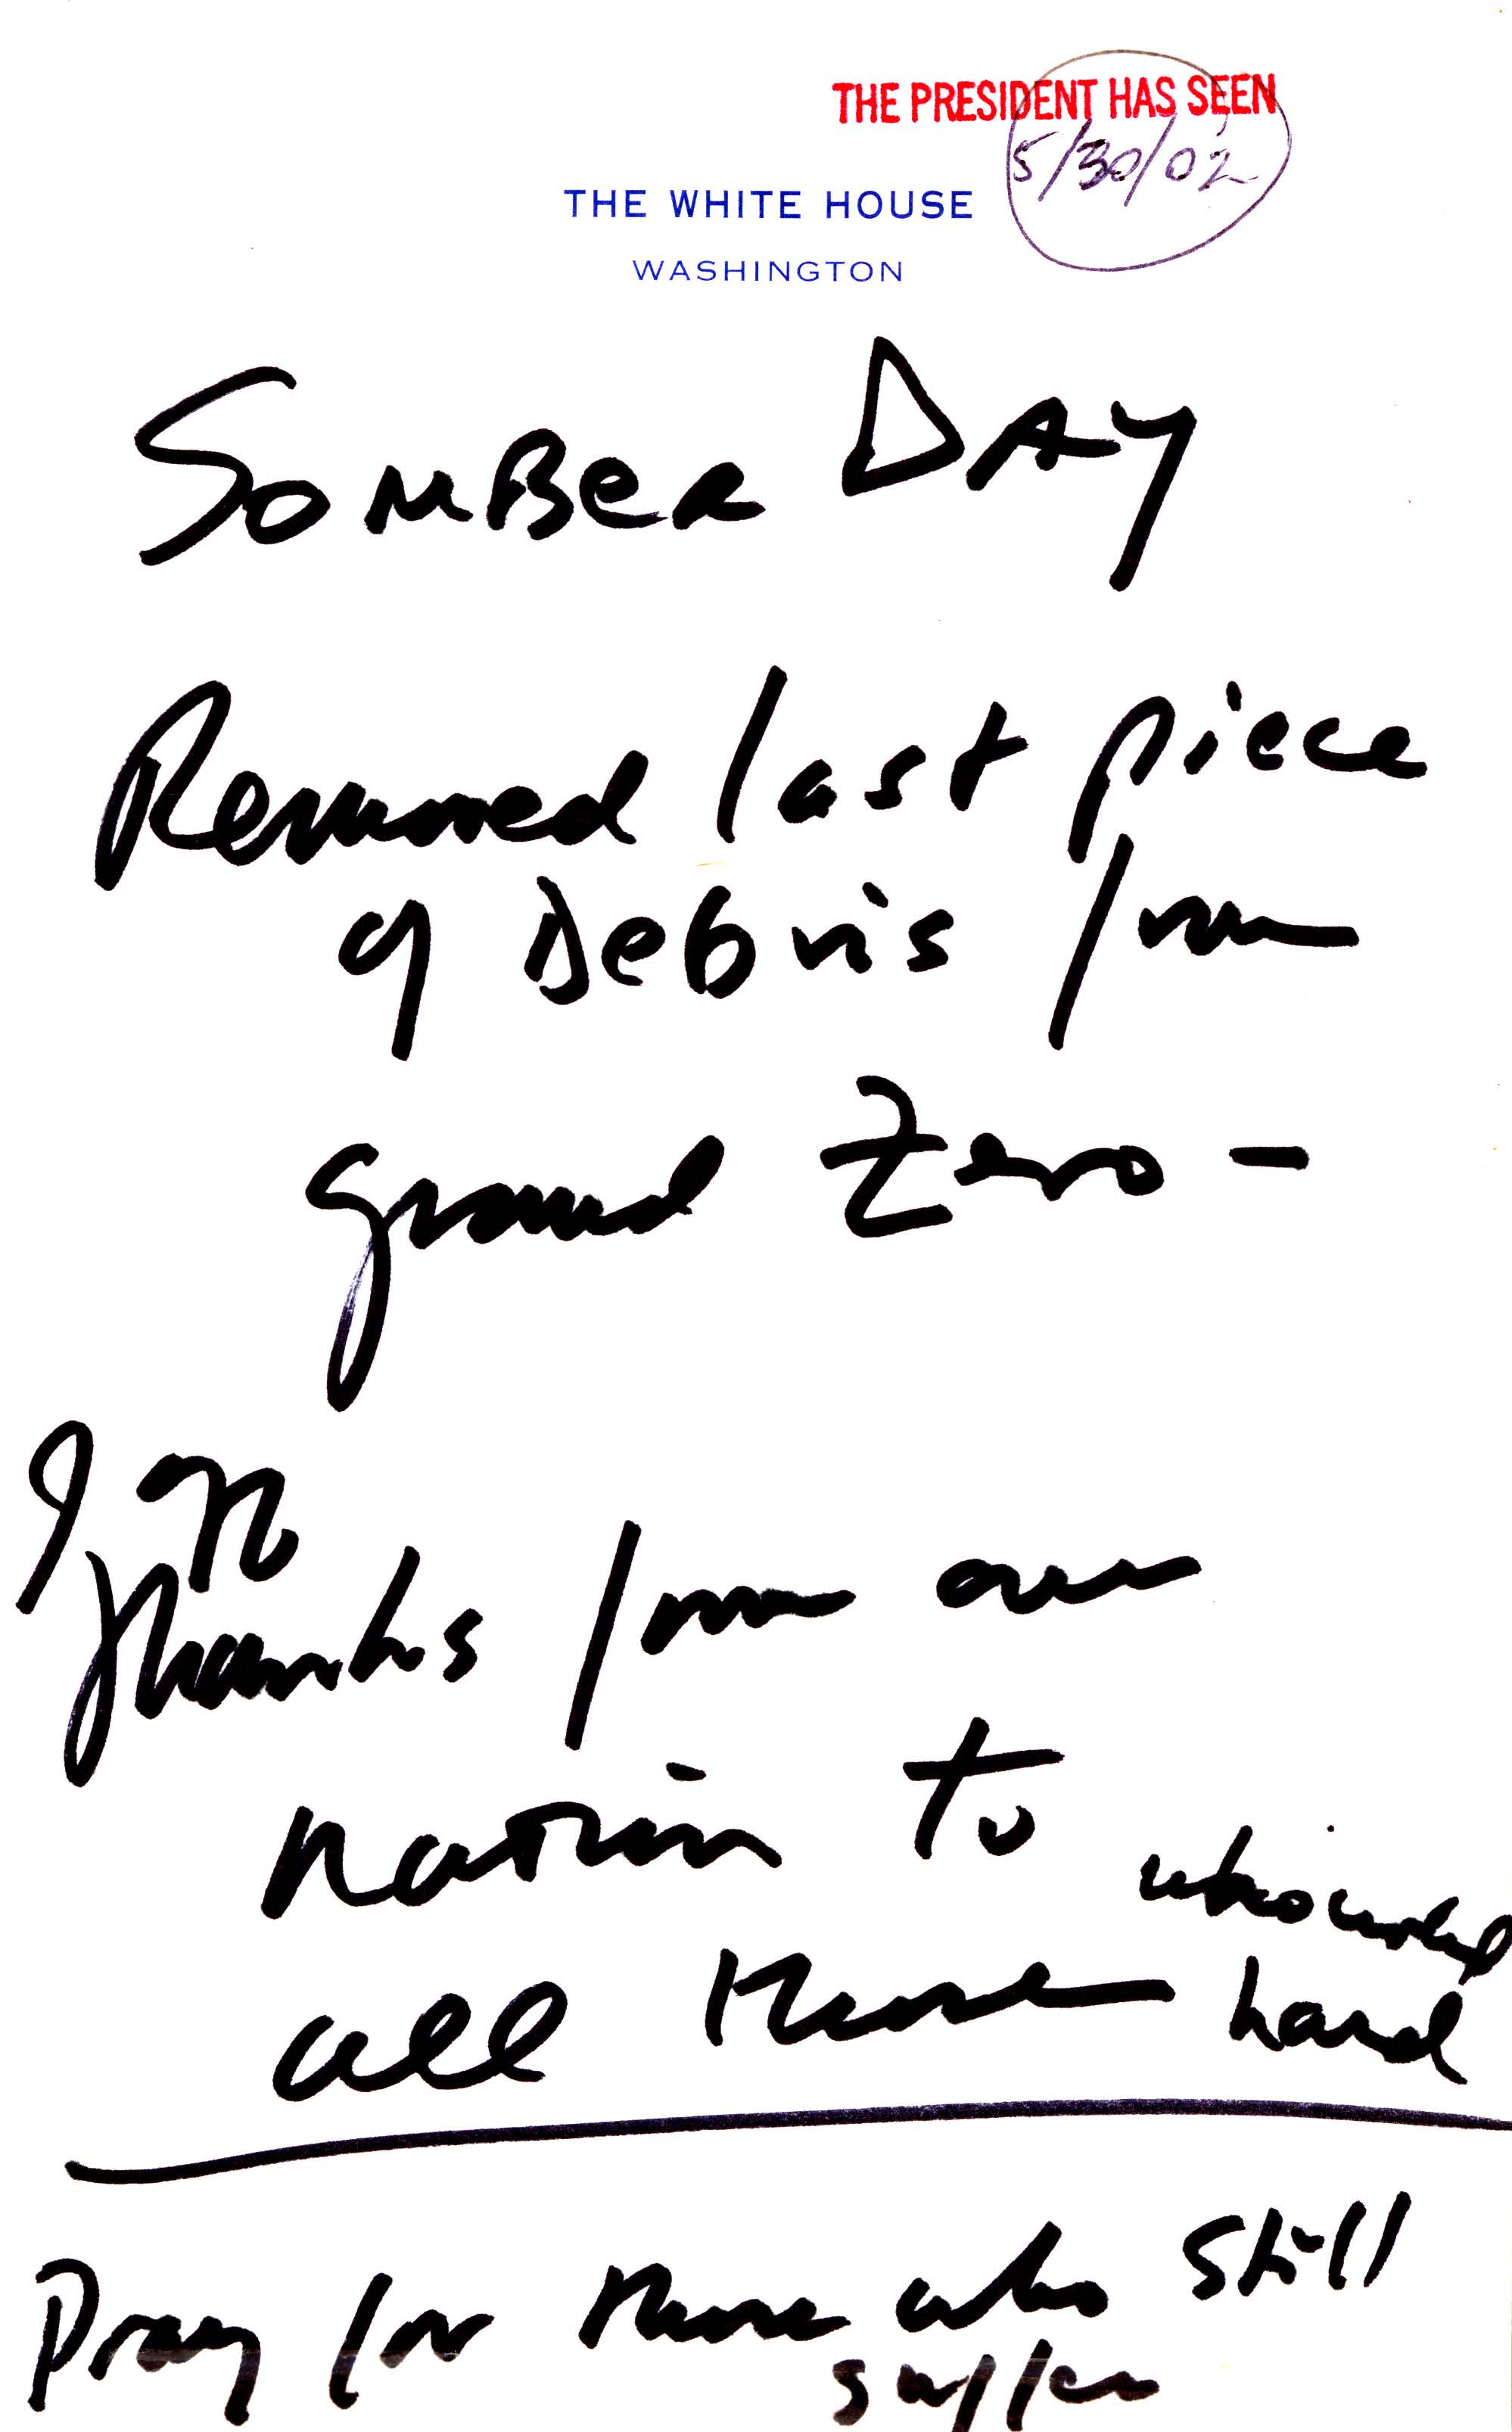 Handwritten notes from President George W. Bush, May 30, 2002.